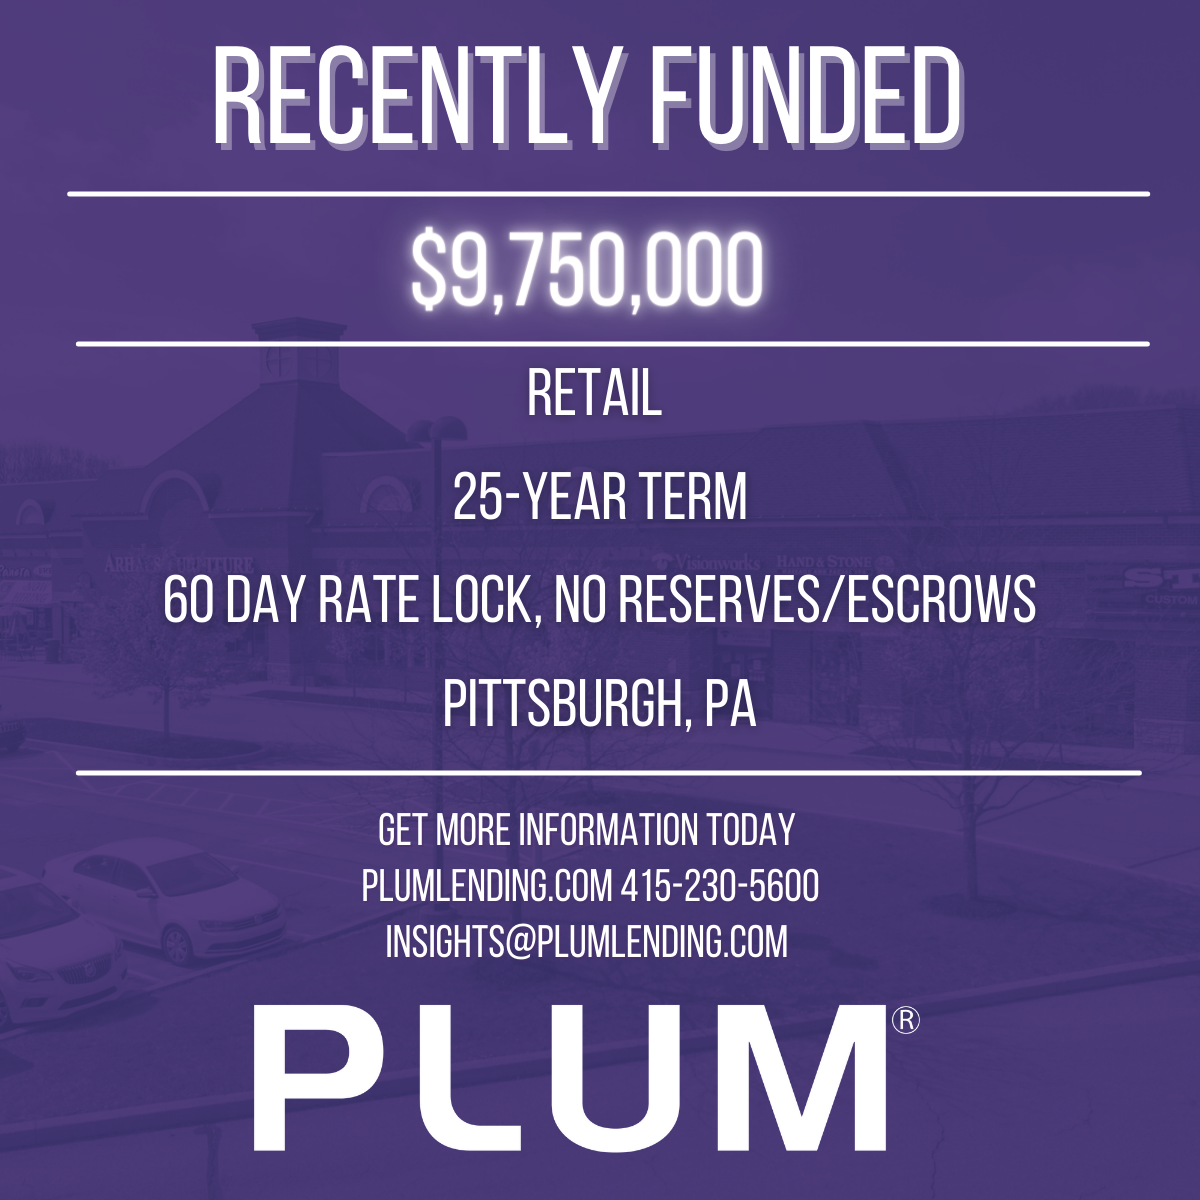 Recently Funded Pitt Retail Full